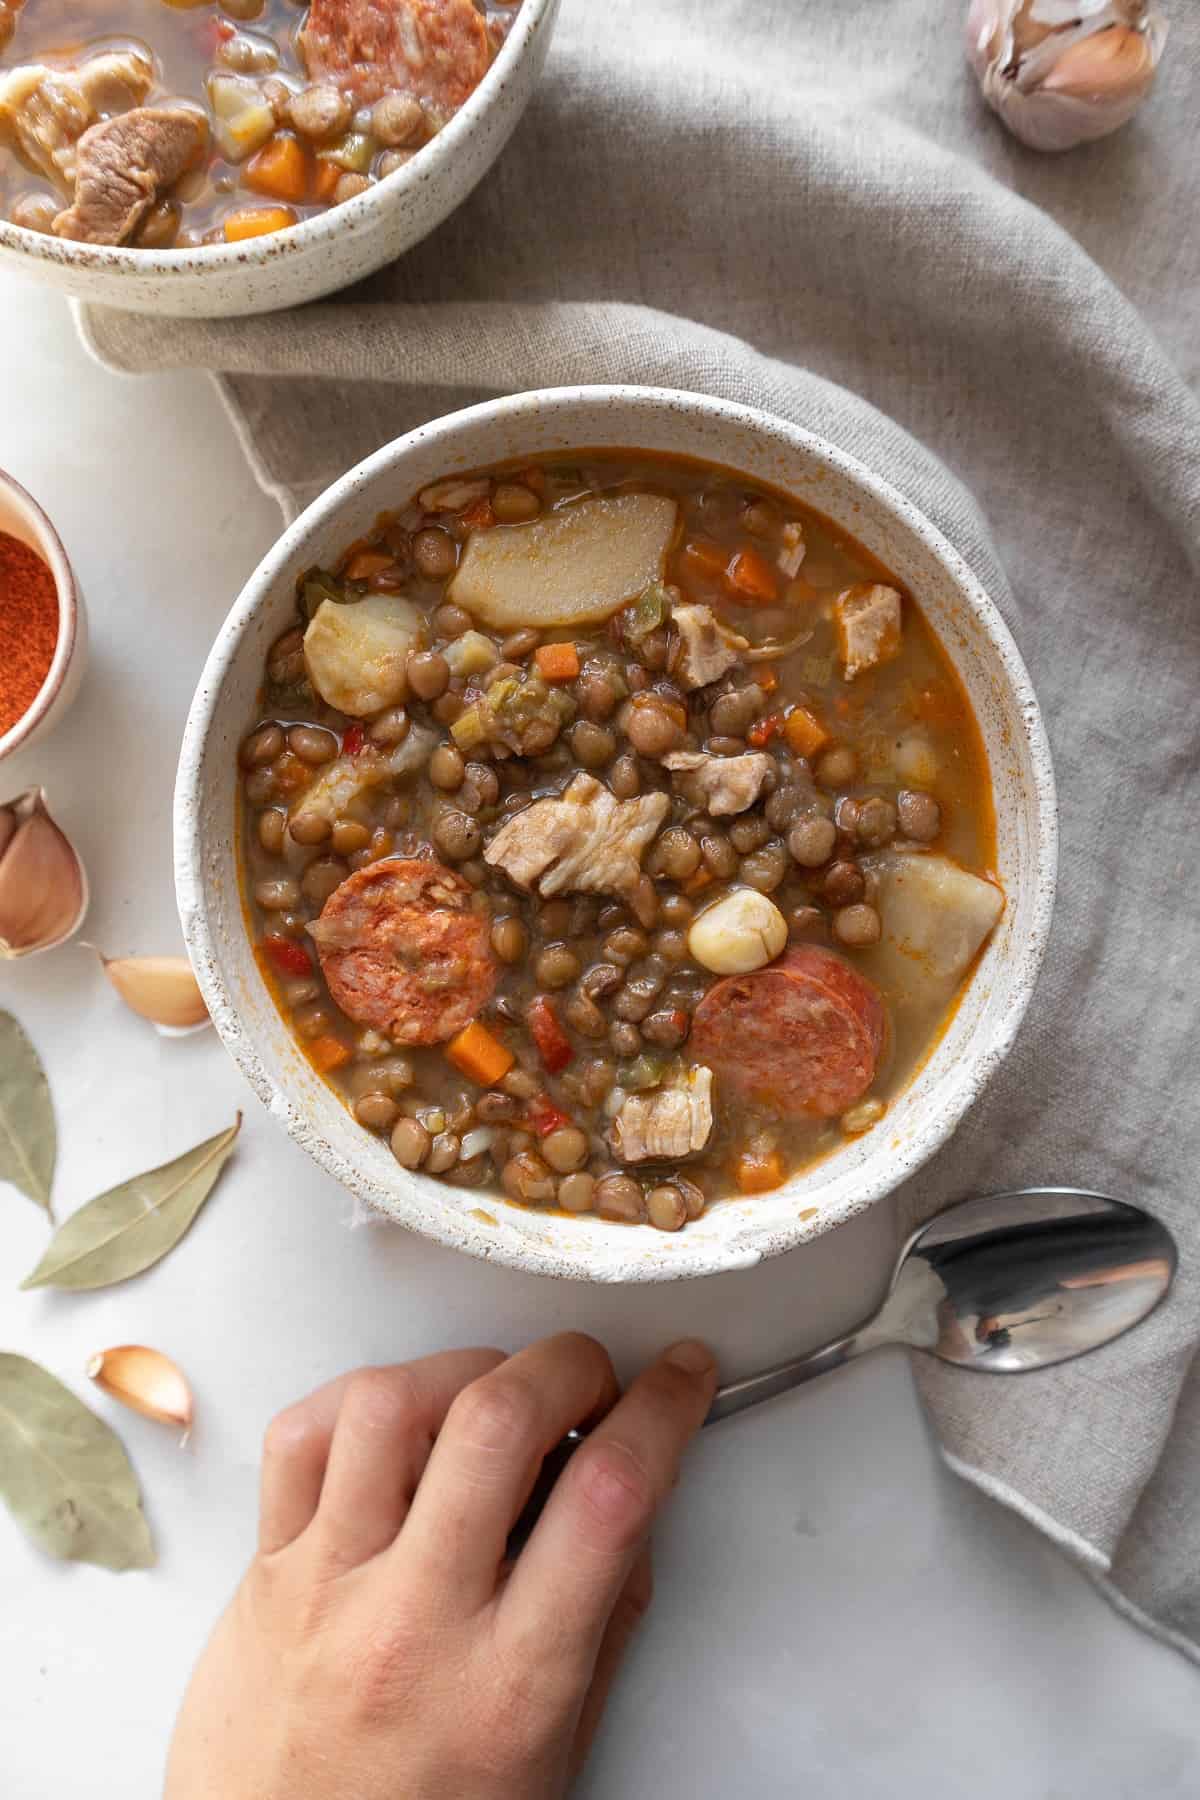 Bowl of Spanish lentil stew and hand grabbing spoon